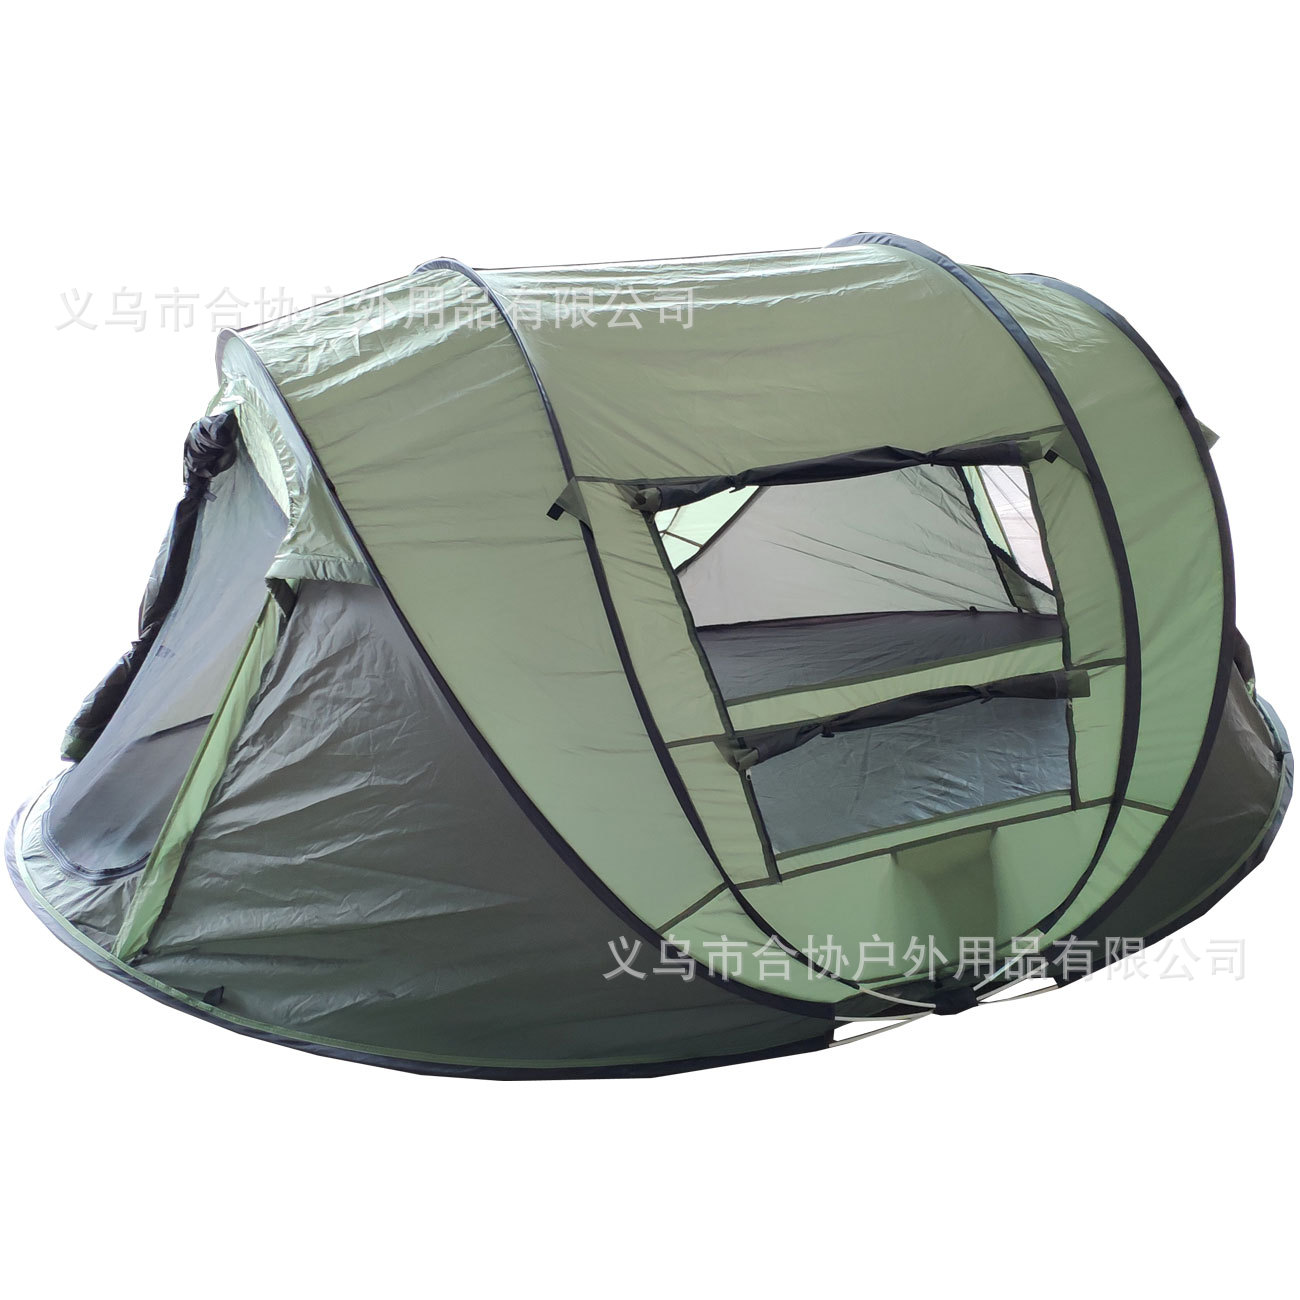 One Second Easy-to-Put-up Tent Automatic Tent Waterproof 3-4 People Camping Automatic Hand Throw Easy-to-Put-up Tent Camping Tent